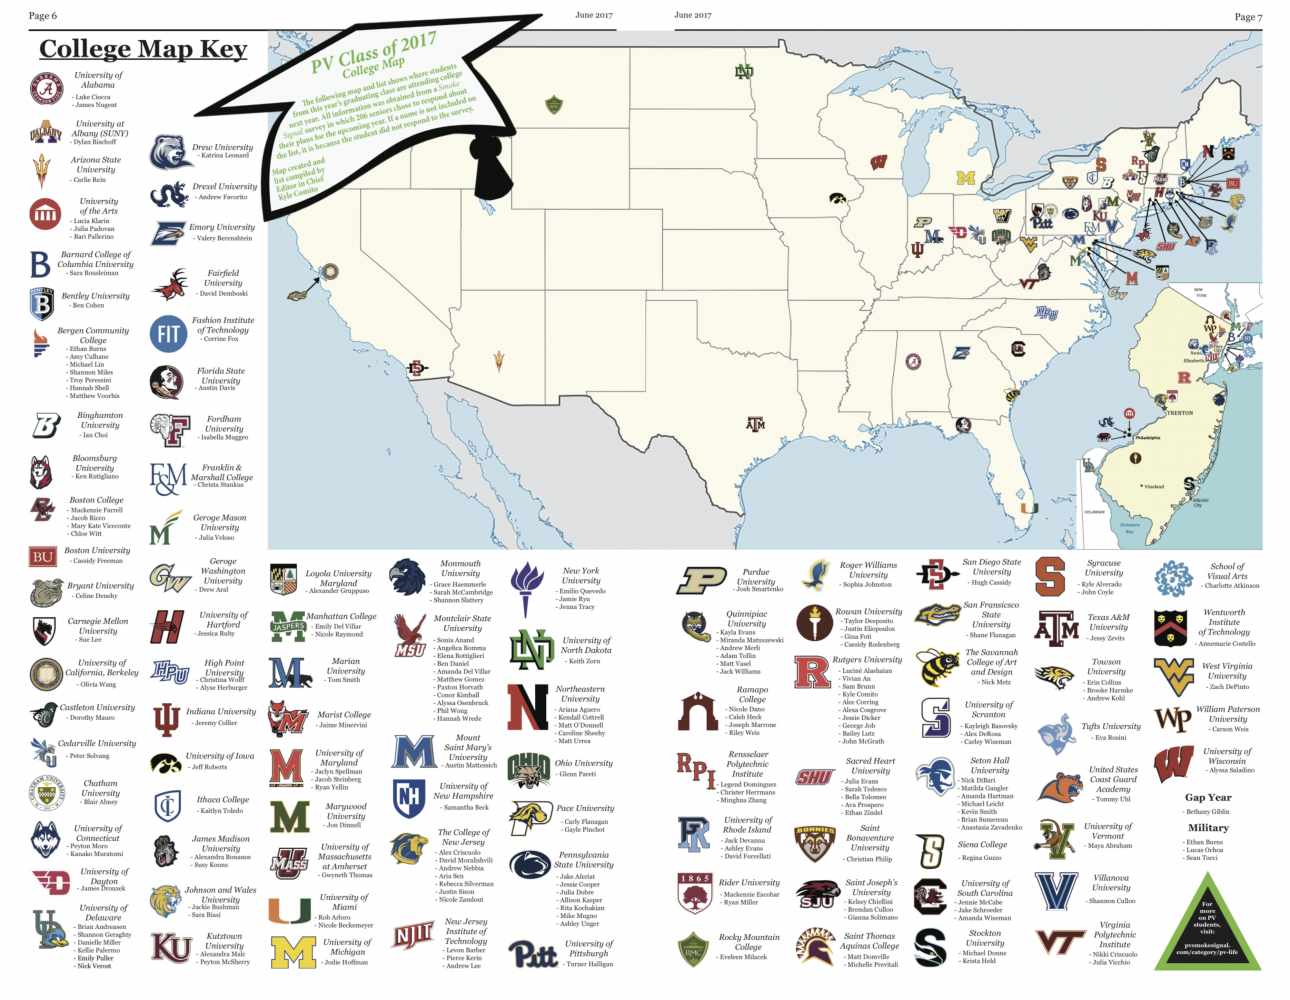 PV Class of 2017 College Map